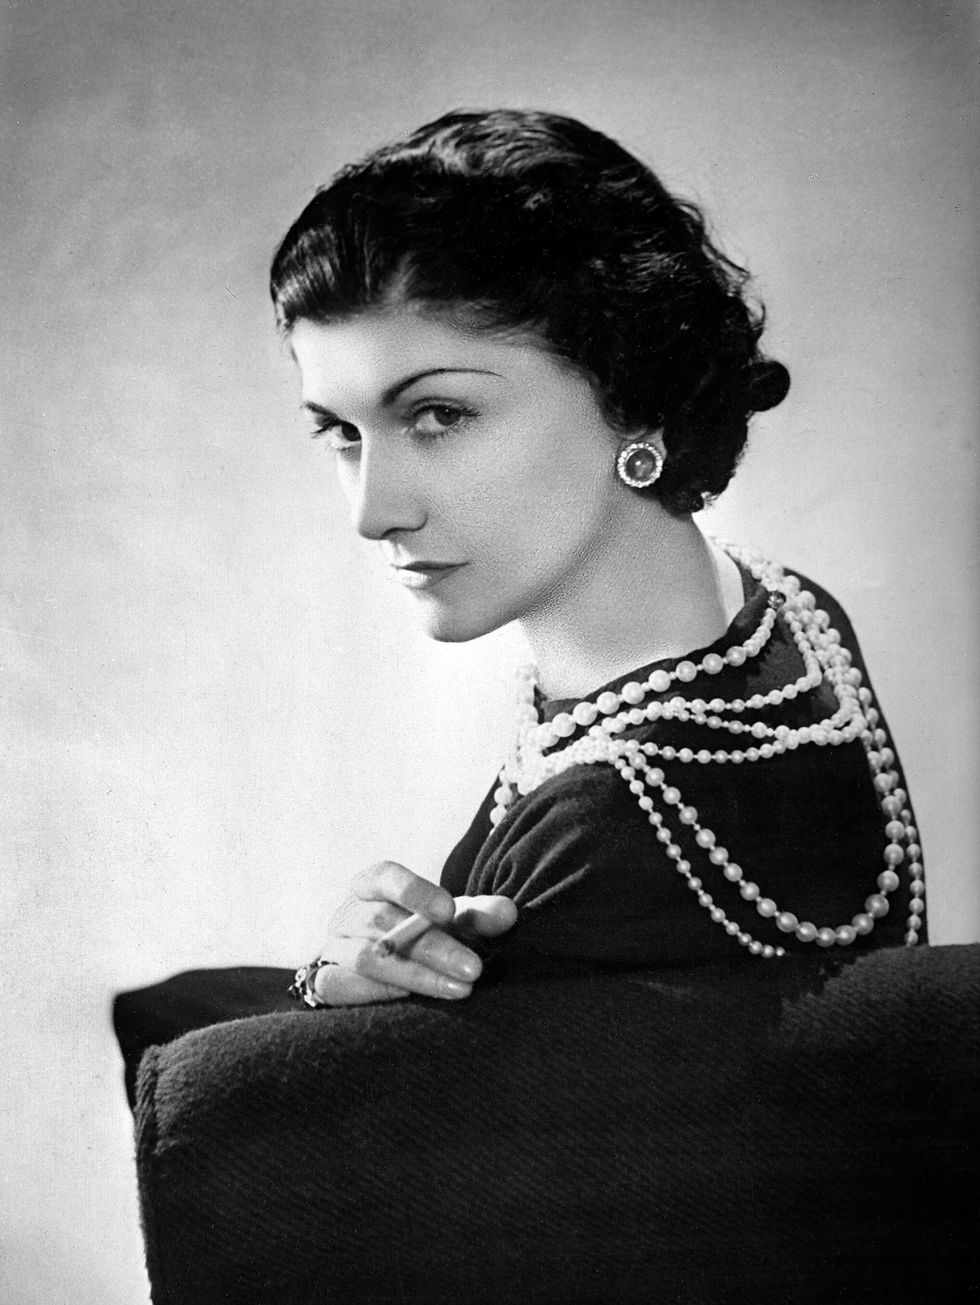 <p>Adornment, what a science! Beauty, what a weapon! Modesty, what elegance!－Coco Chanel</p><p><strong data-redactor-tag="strong" data-verified="redactor">延伸閱讀</strong>＞＞＞<a href="http://www.harpersbazaar.com.tw/fashion/news/g1576/things-you-need-to-know-about-chanel/" target="_blank" data-tracking-id="recirc-text-link">時裝界最深刻的革命傳奇，CHANEL的8個KEYWORDS</a><span class="redactor-invisible-space" data-verified="redactor" data-redactor-tag="span" data-redactor-class="redactor-invisible-space"><a href="http://www.harpersbazaar.com.tw/fashion/news/g1576/things-you-need-to-know-about-chanel/"></a></span><br></p>